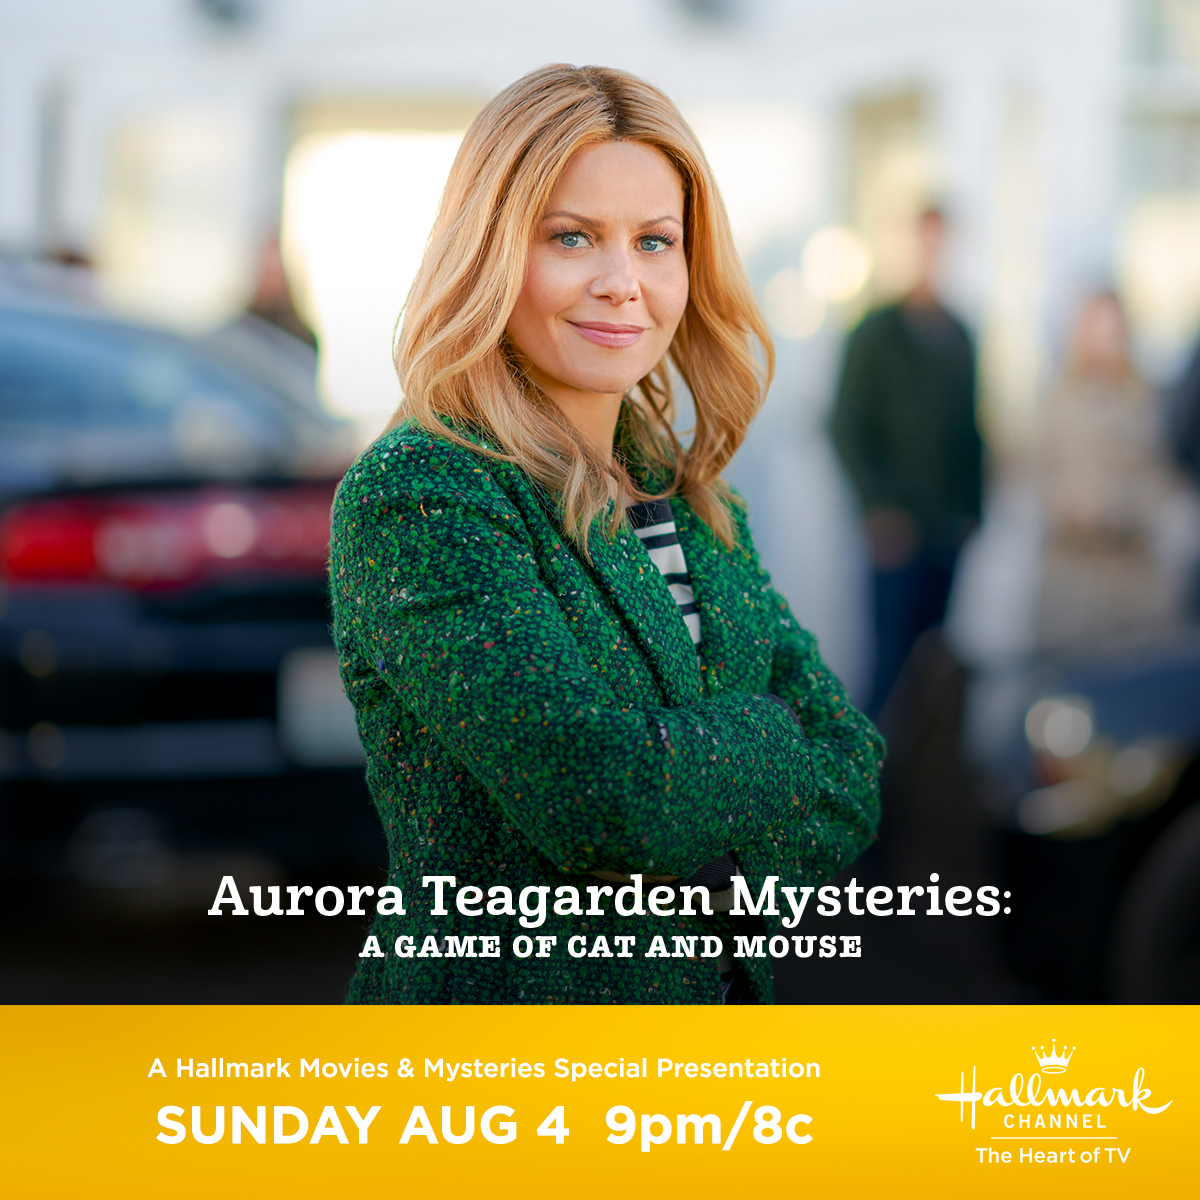 Hallmark Movies & Mysteries "Aurora Teagarden Mysteries: A Game of Cat and Mouse" Premiering this Sunday, August 4th at 9pm/8c!